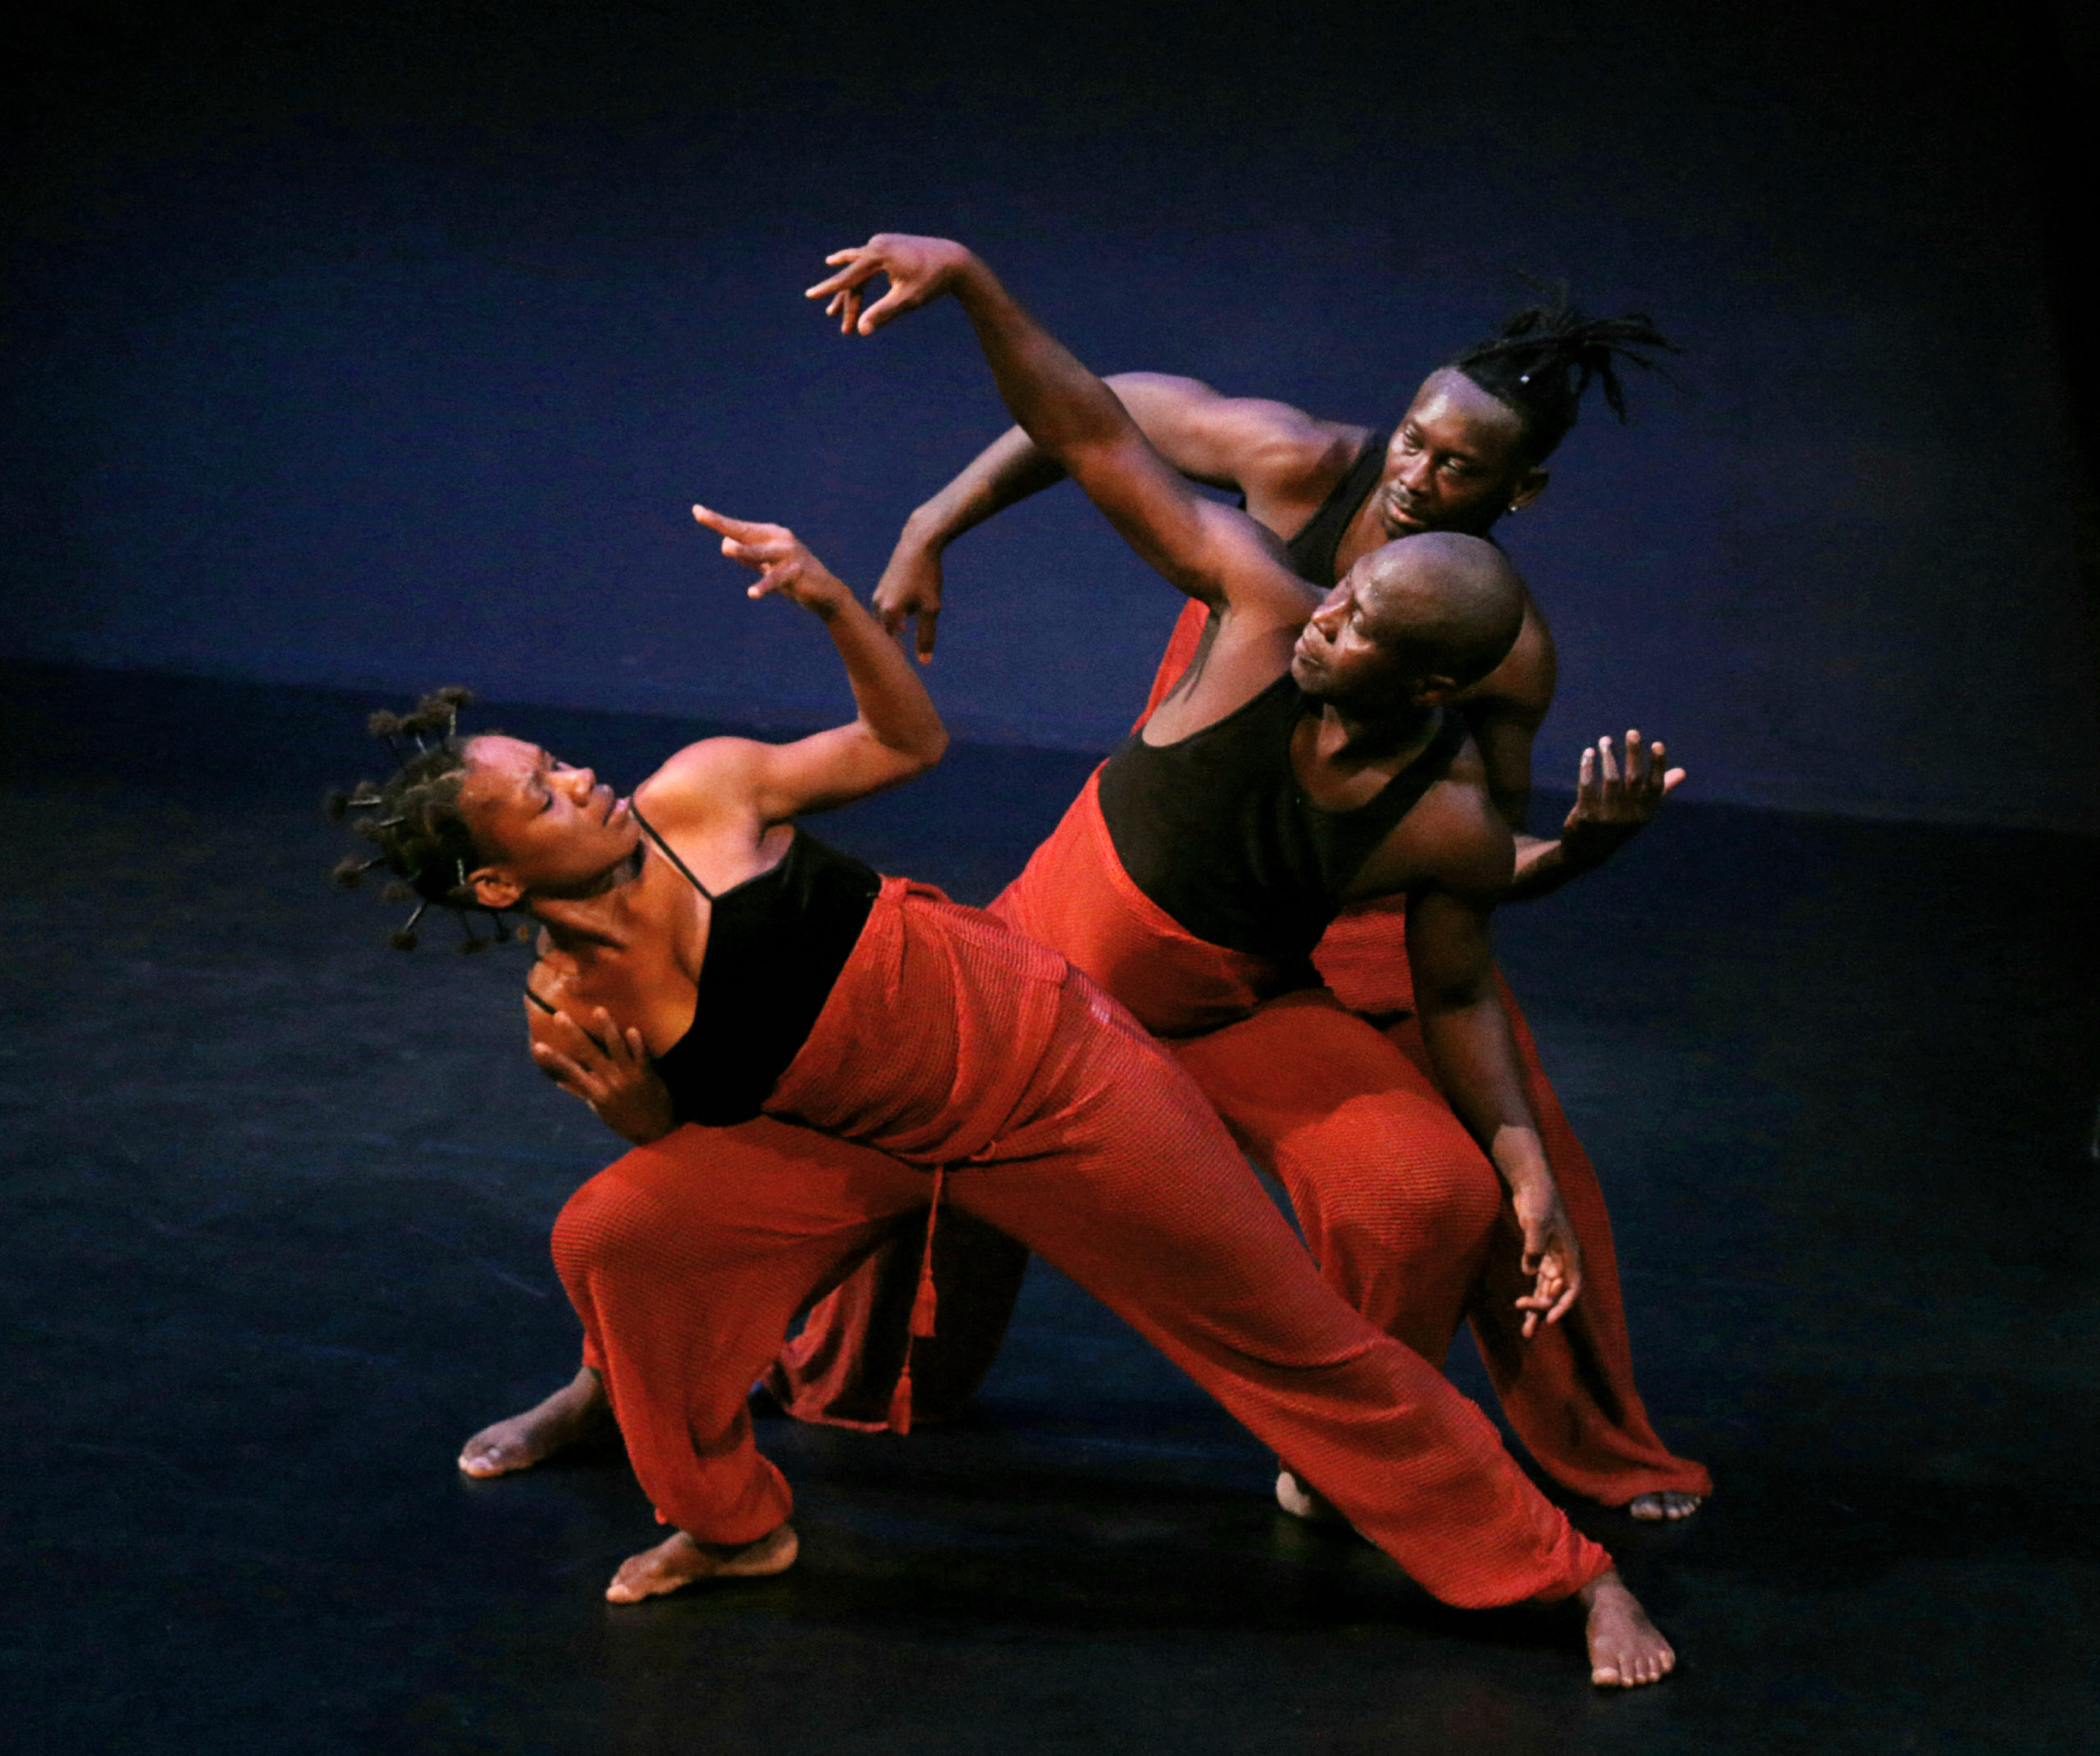 3 dancers wearing red pants and black top